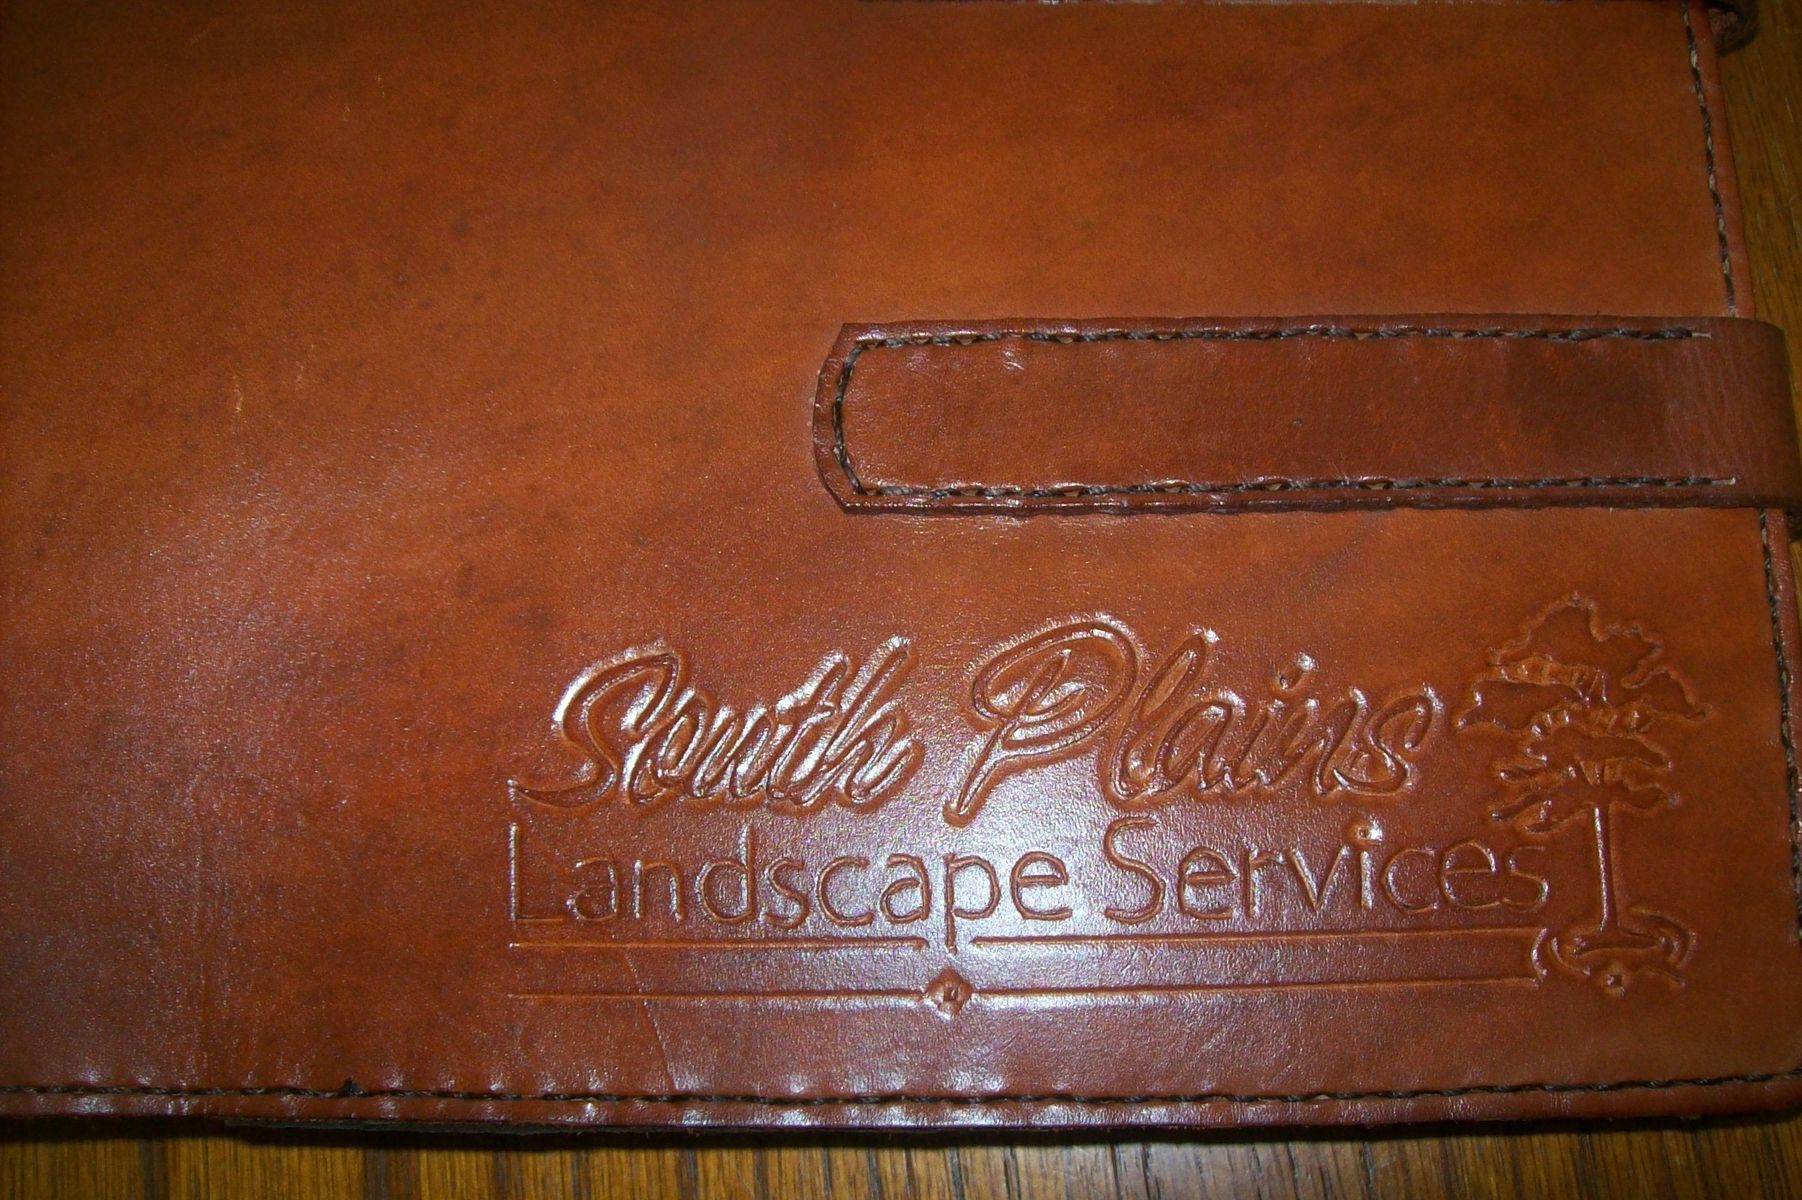 leather checkbook cover